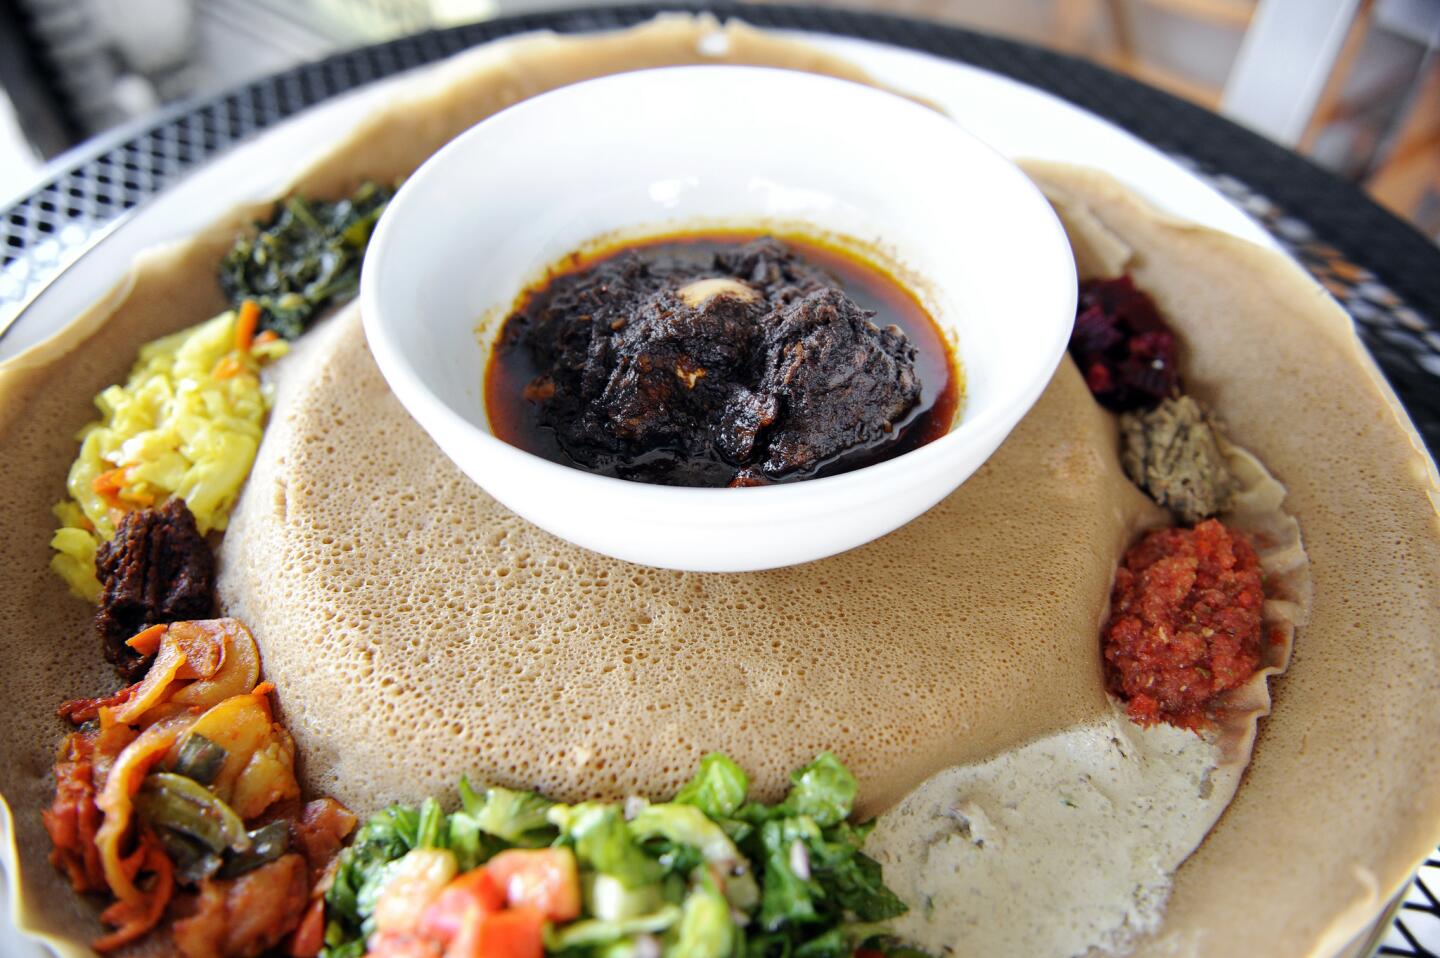 Many of the Ethiopian dishes at Meals by Genet have been turned vegetarian or vegan. Here, tibs, typically a meat stew, is made with tofu.